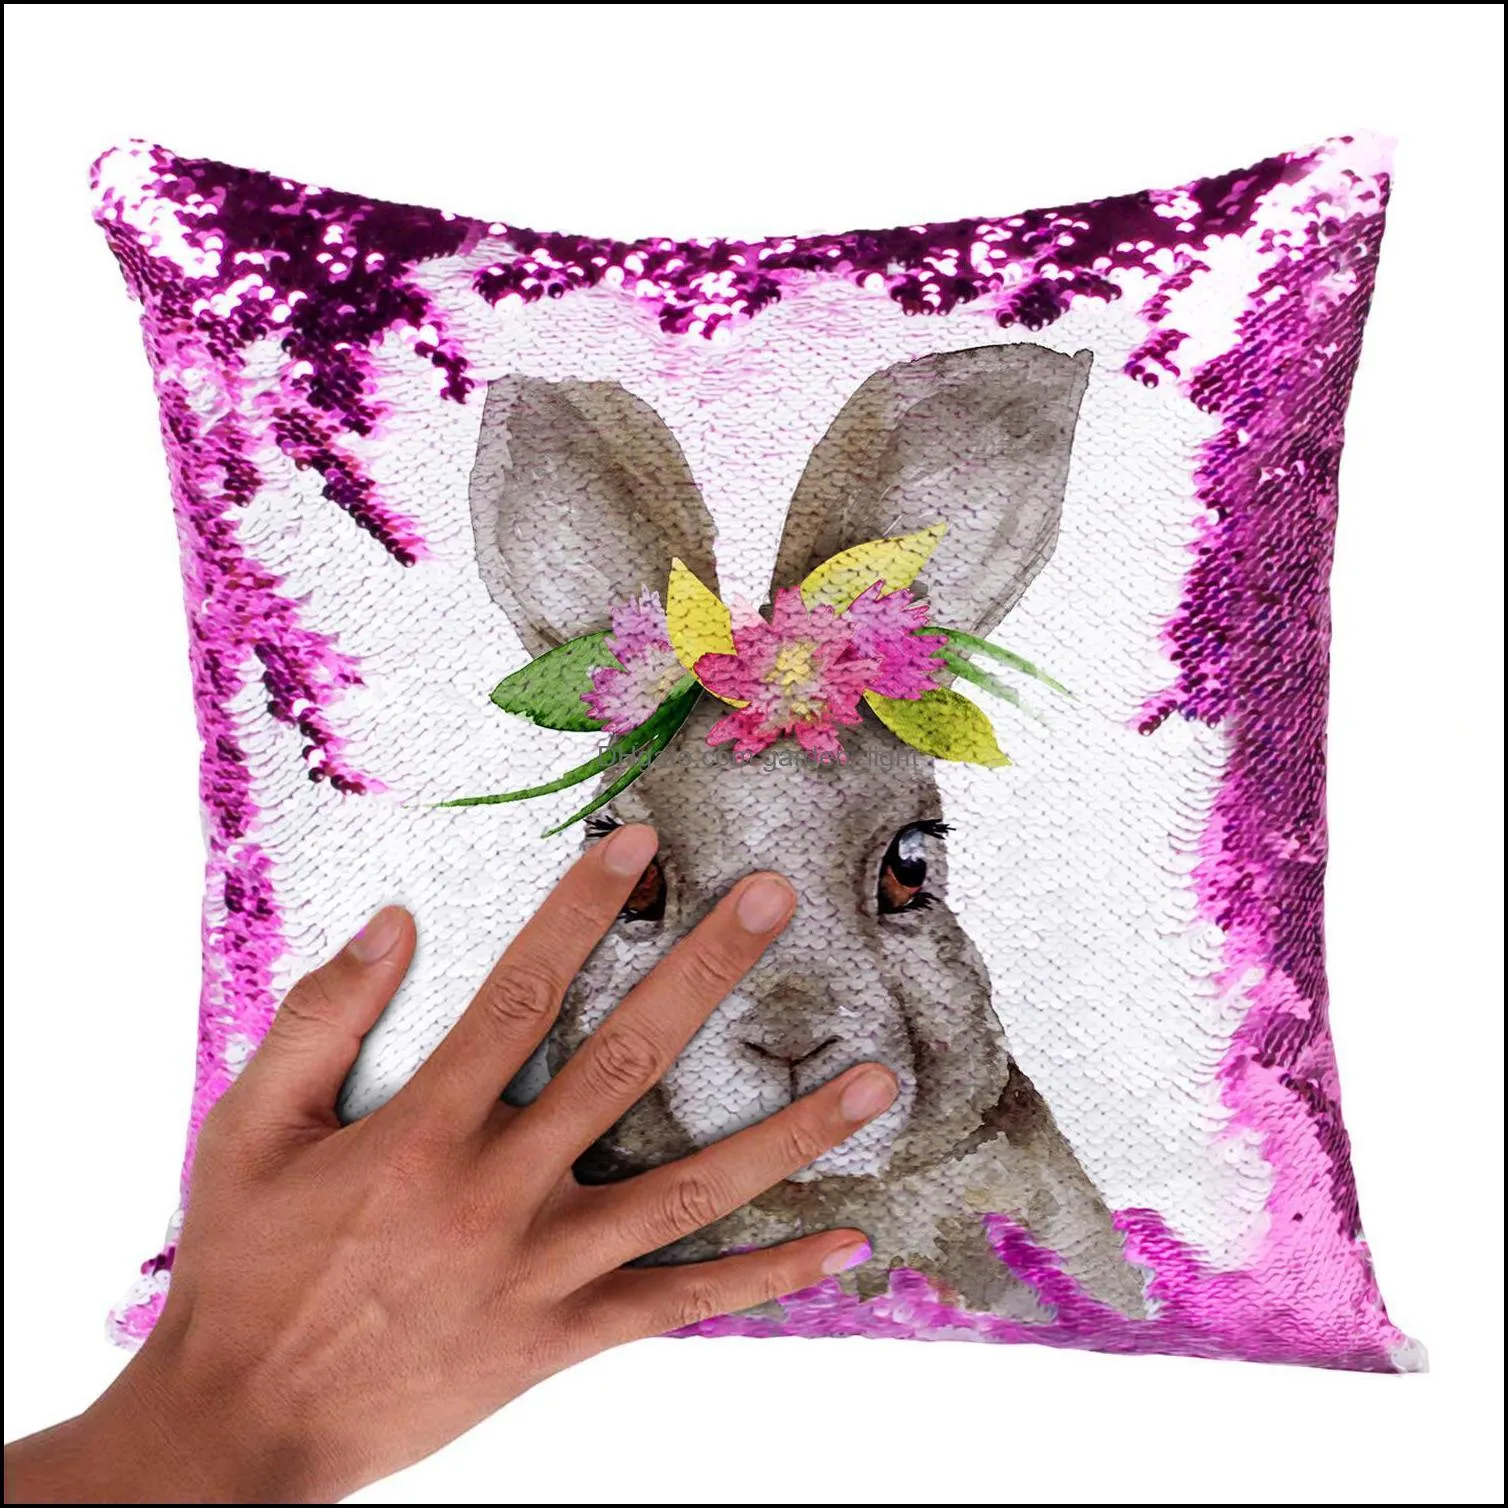 super shining magical rabbit mermaid cushion cover with sequins reversible color changing pillow case pillow cover for seat decor